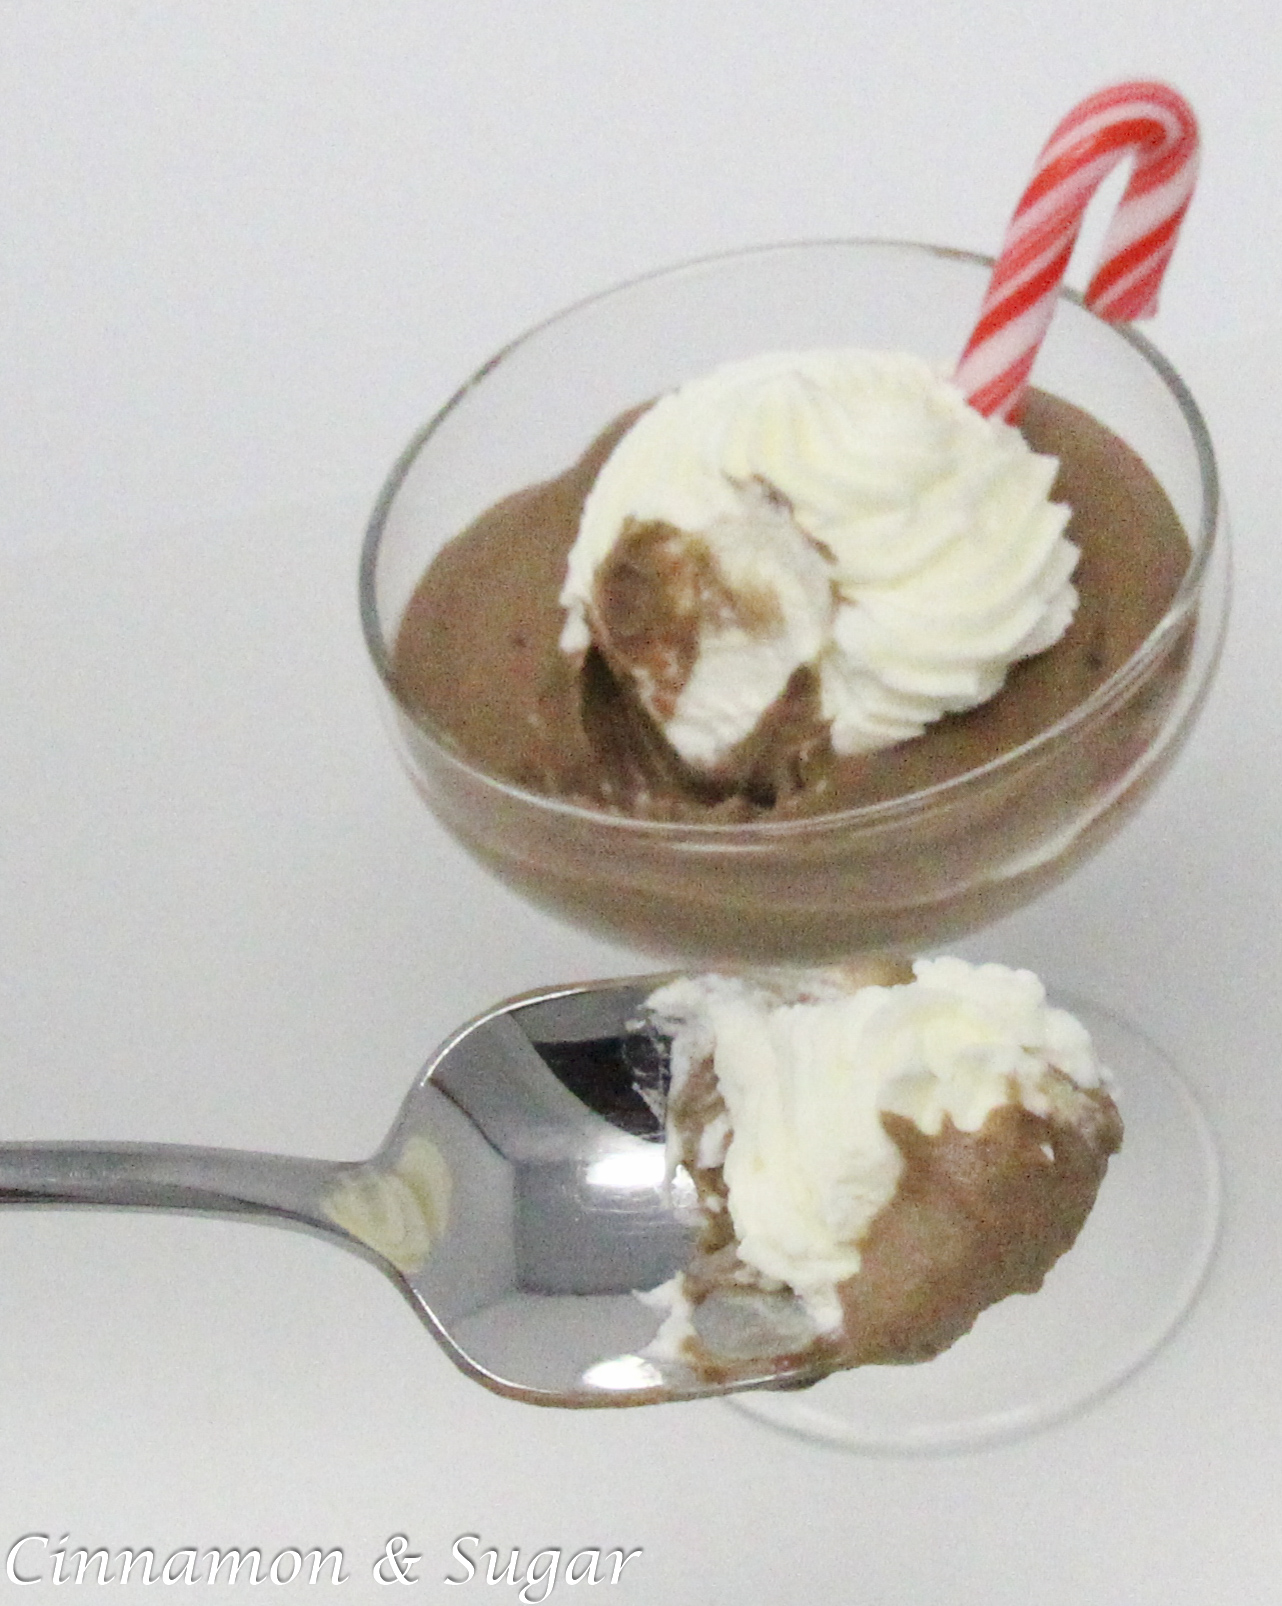 Rich, creamy, and oh so delightful, the extra kick of espresso added a yummy depth to the dark chocolate in this easy to make Blender Chocolate Mousse. Recipe shared with permission granted by Amy Pershing, author of AN EGGNOG TO DIE FOR.